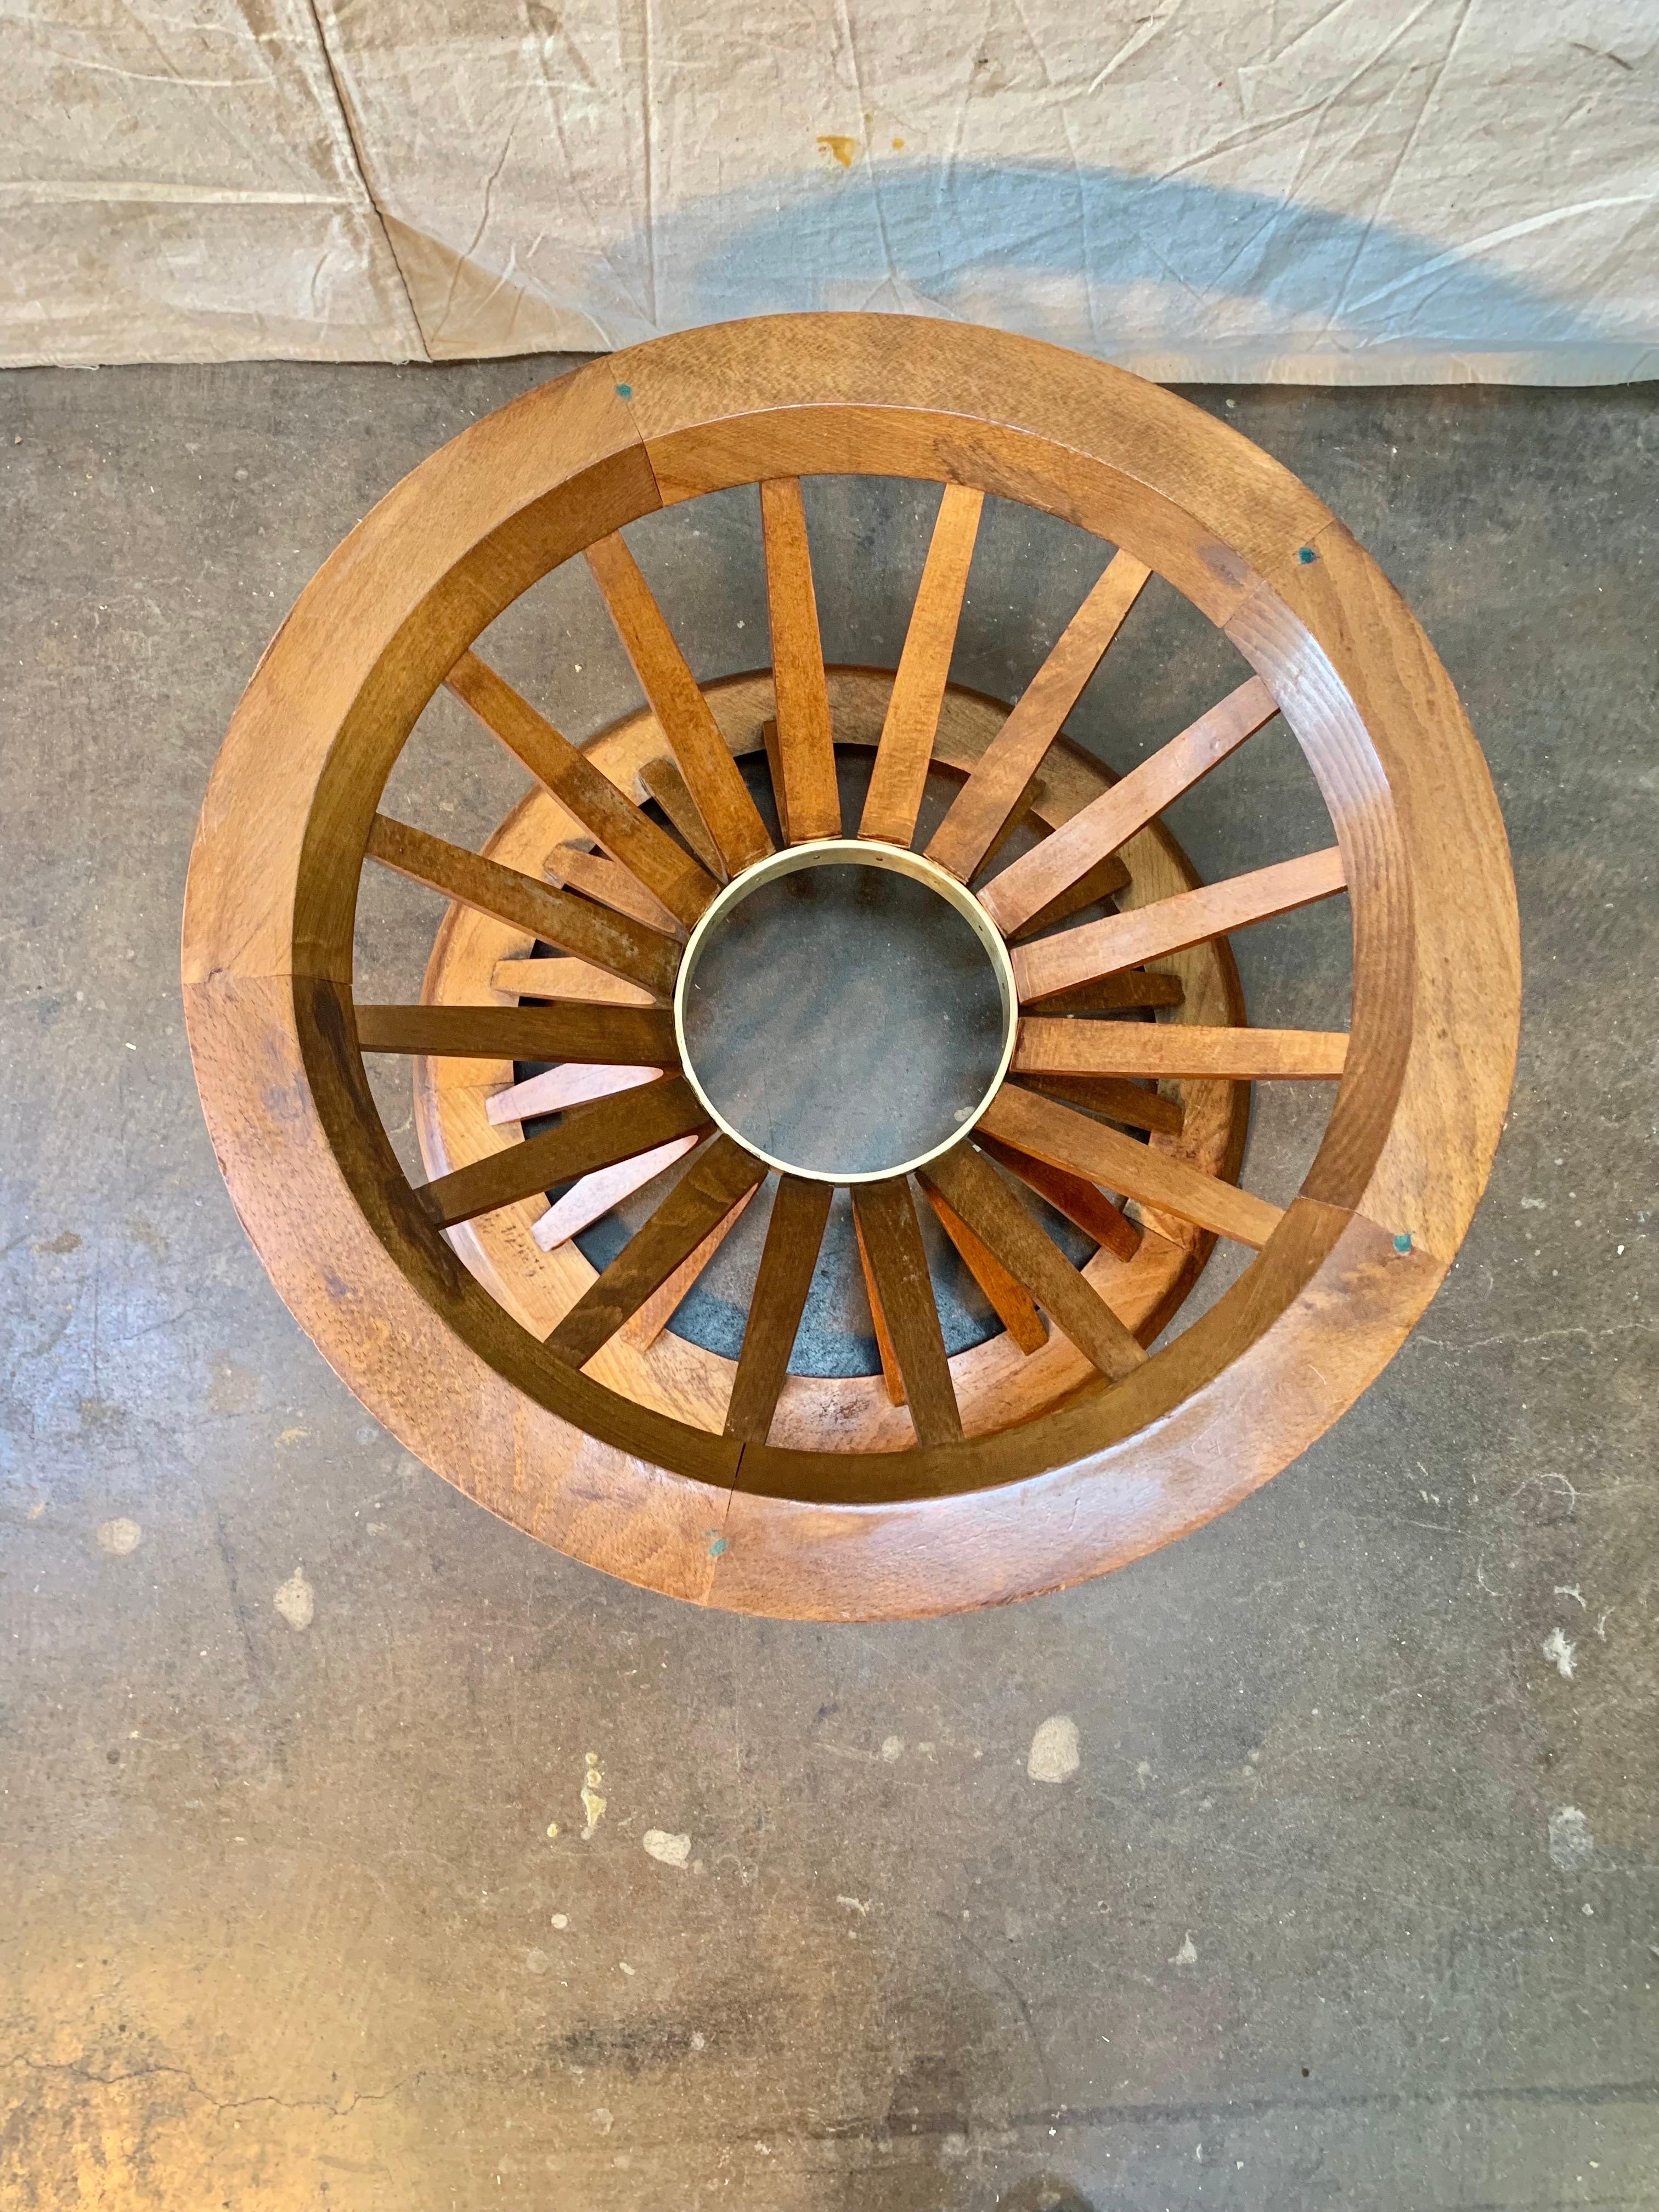 Mid Century Modern Edward Wormley Sheaf of Wheat Coffee Table In Good Condition For Sale In Burton, TX